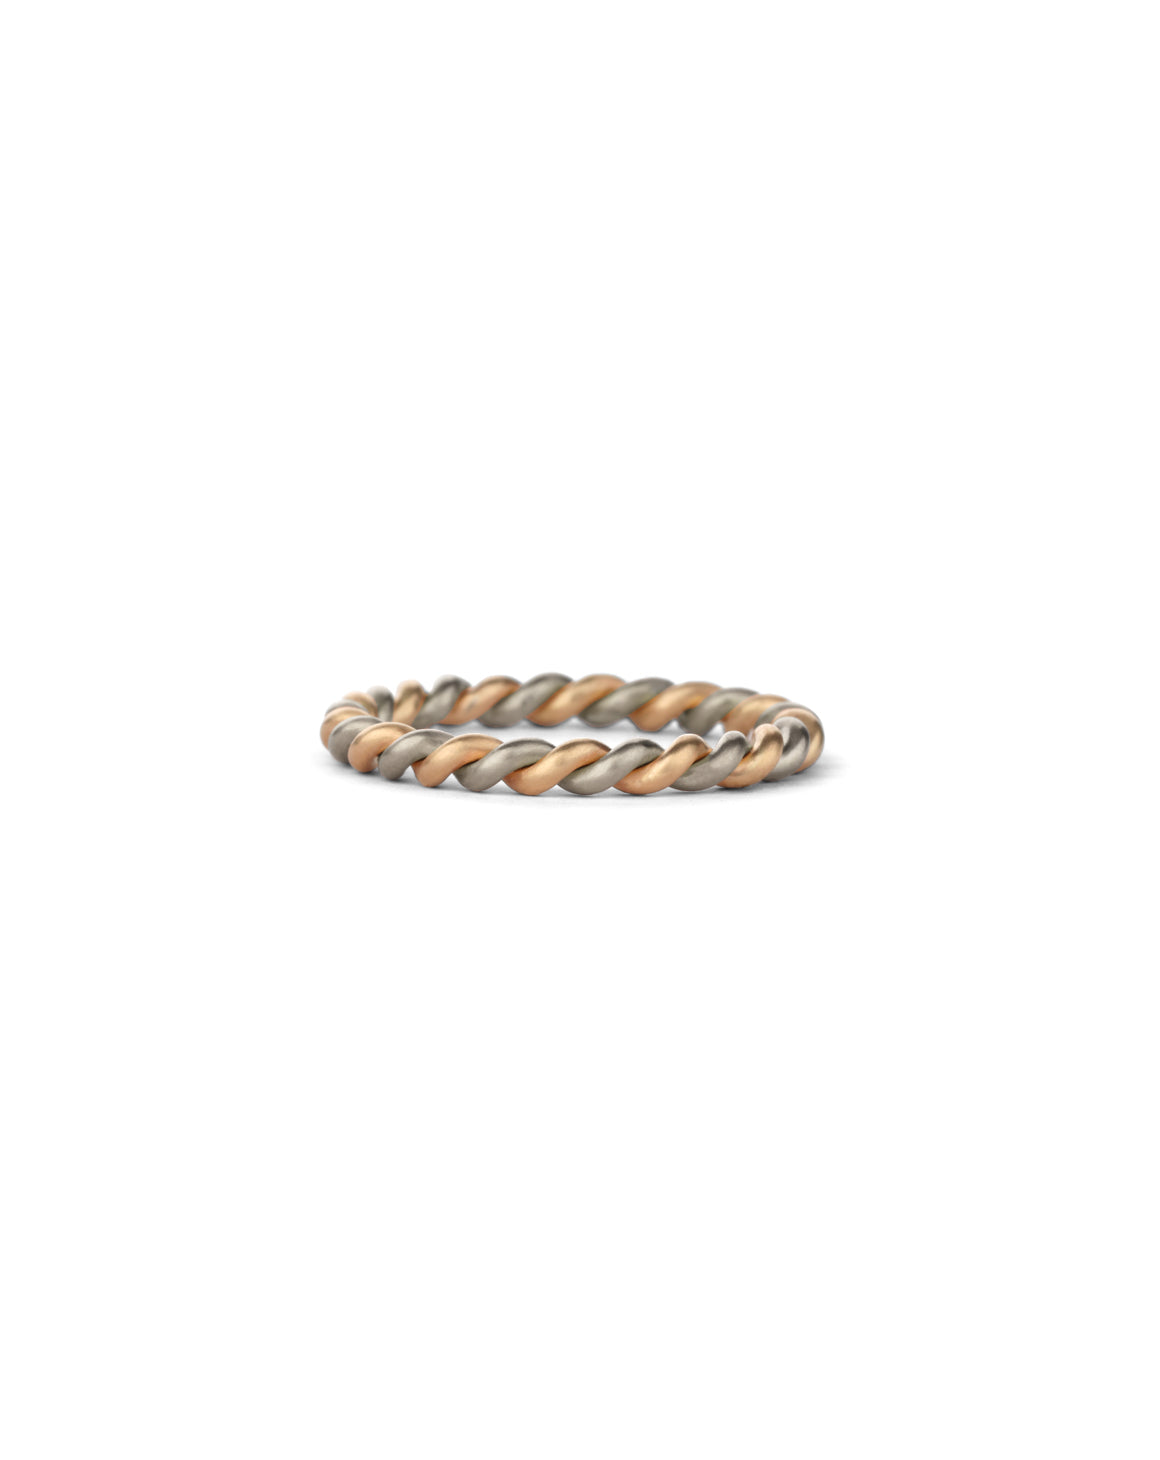 Two Strand Rope Ring - mixed metal - heavy